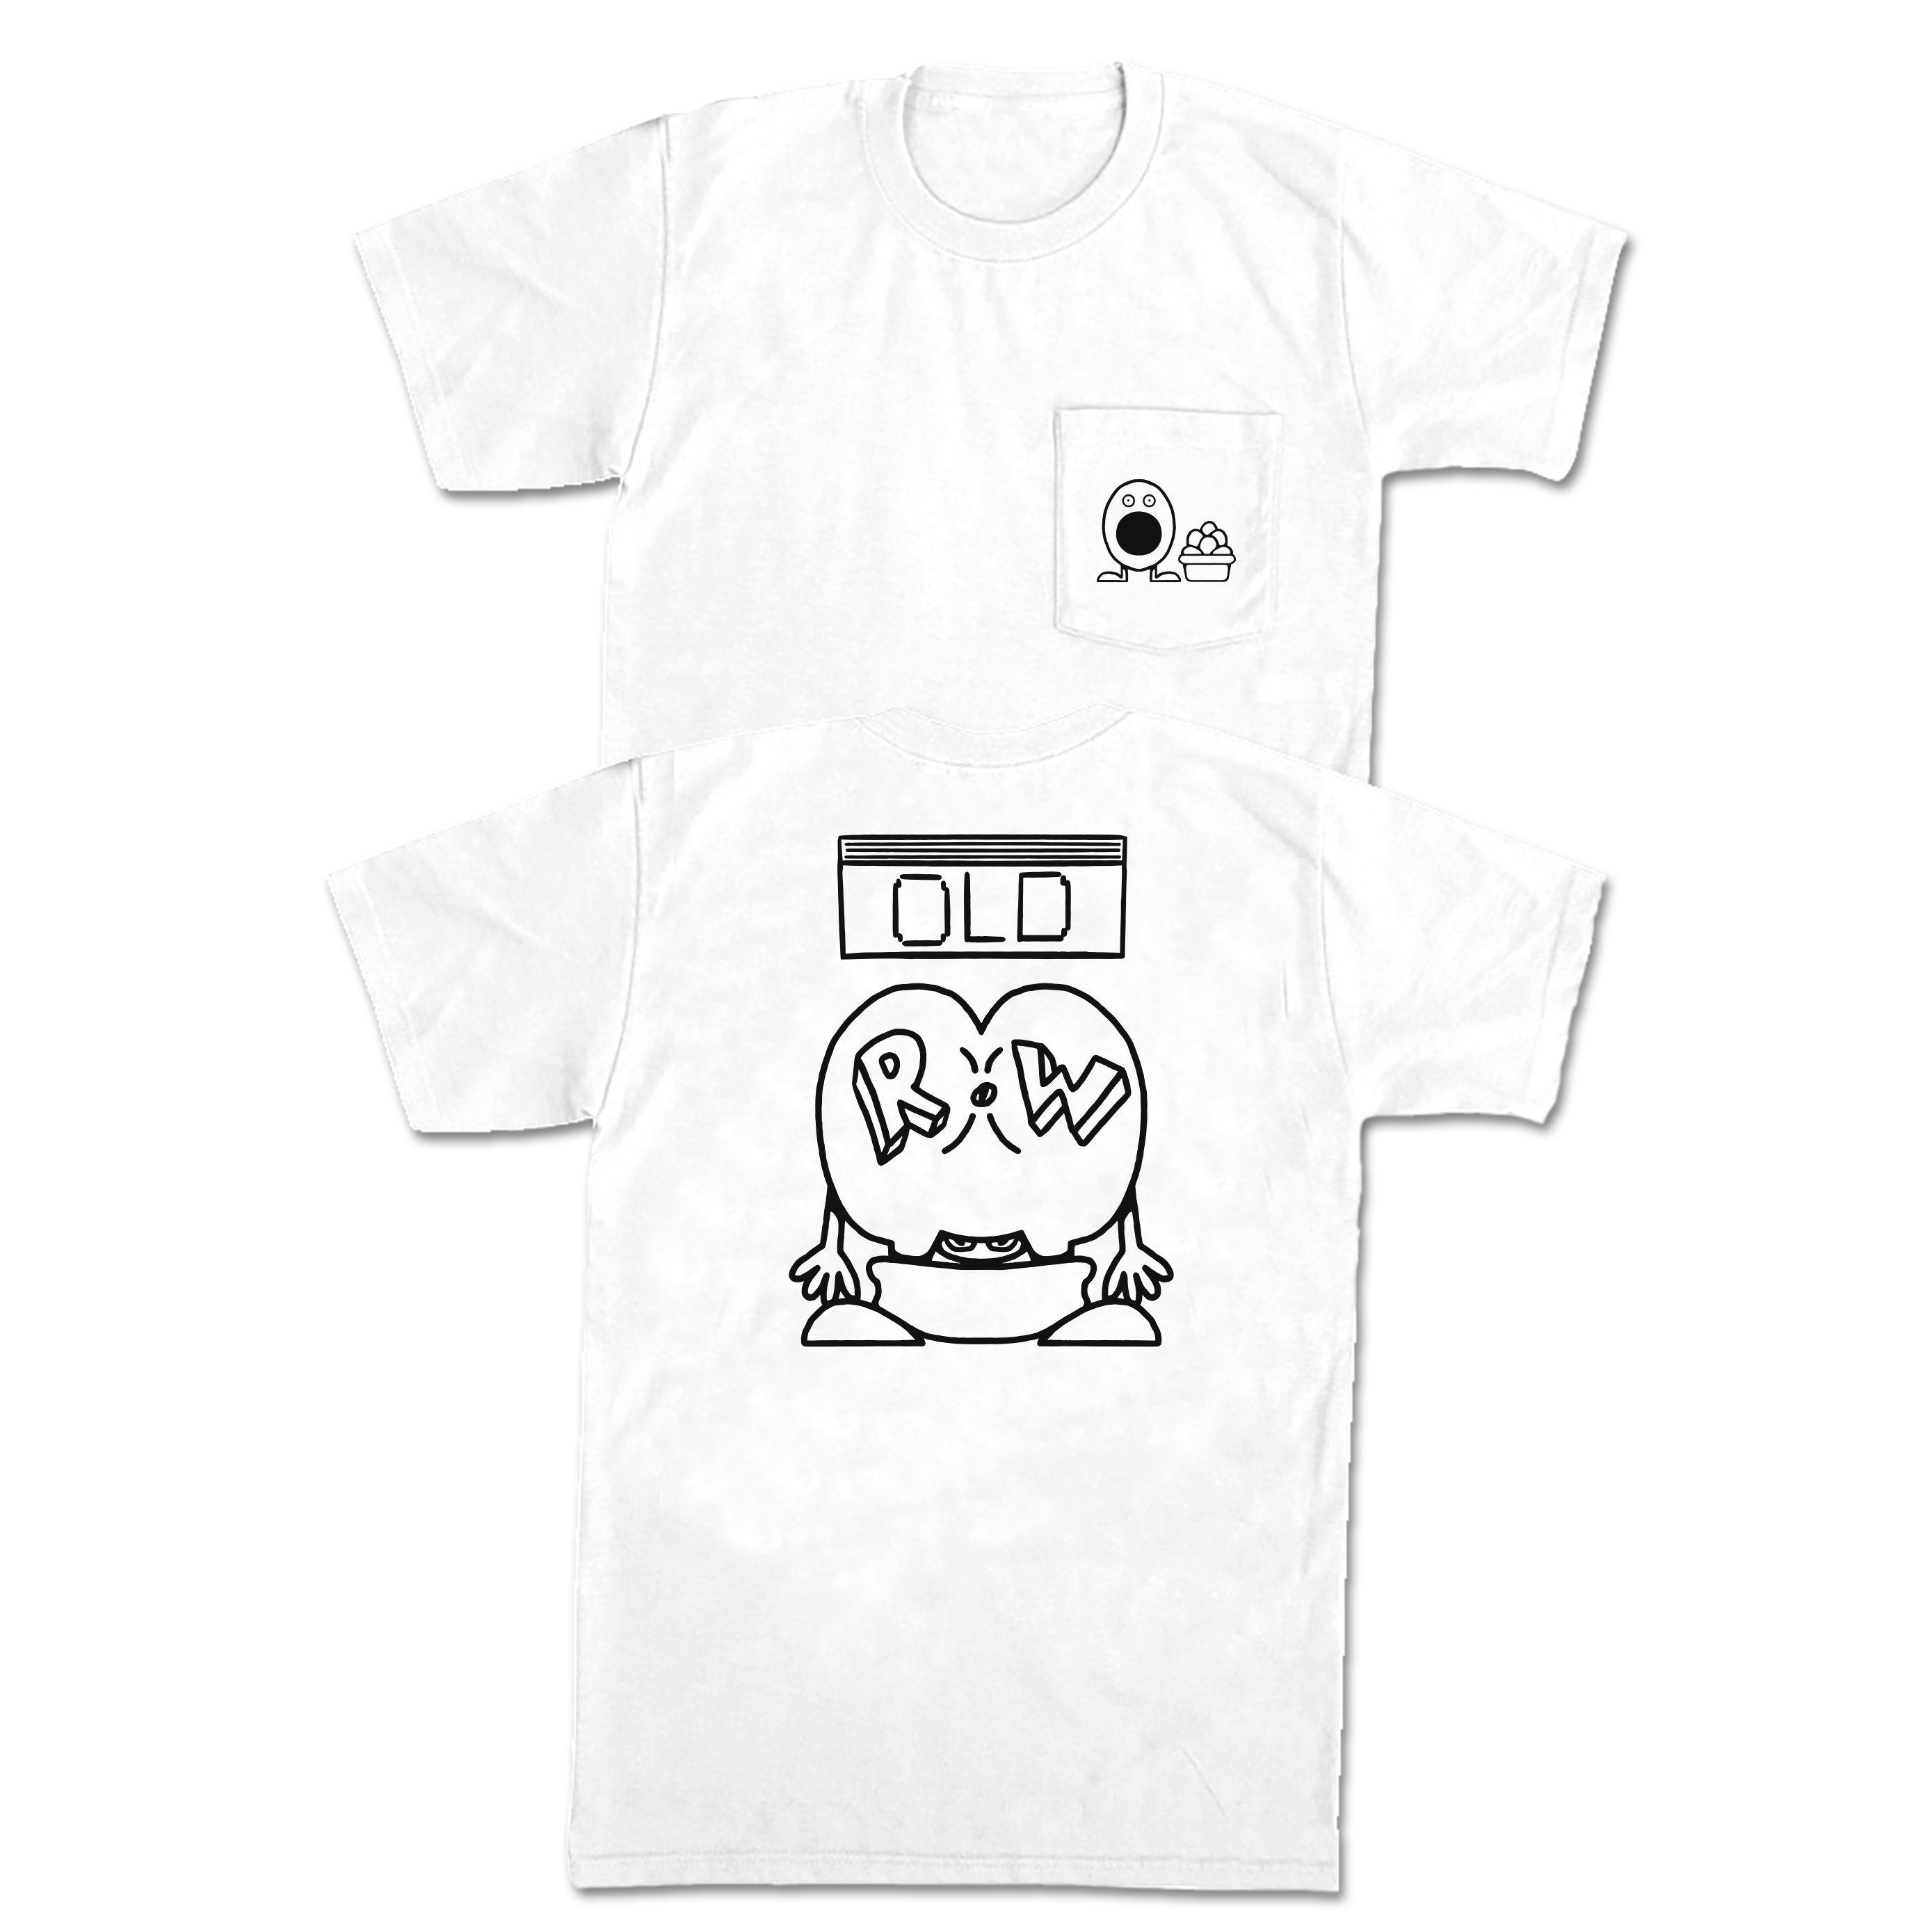 The Eggman Game Pocket Tee - Old Row T-Shirts, Clothing & Merch